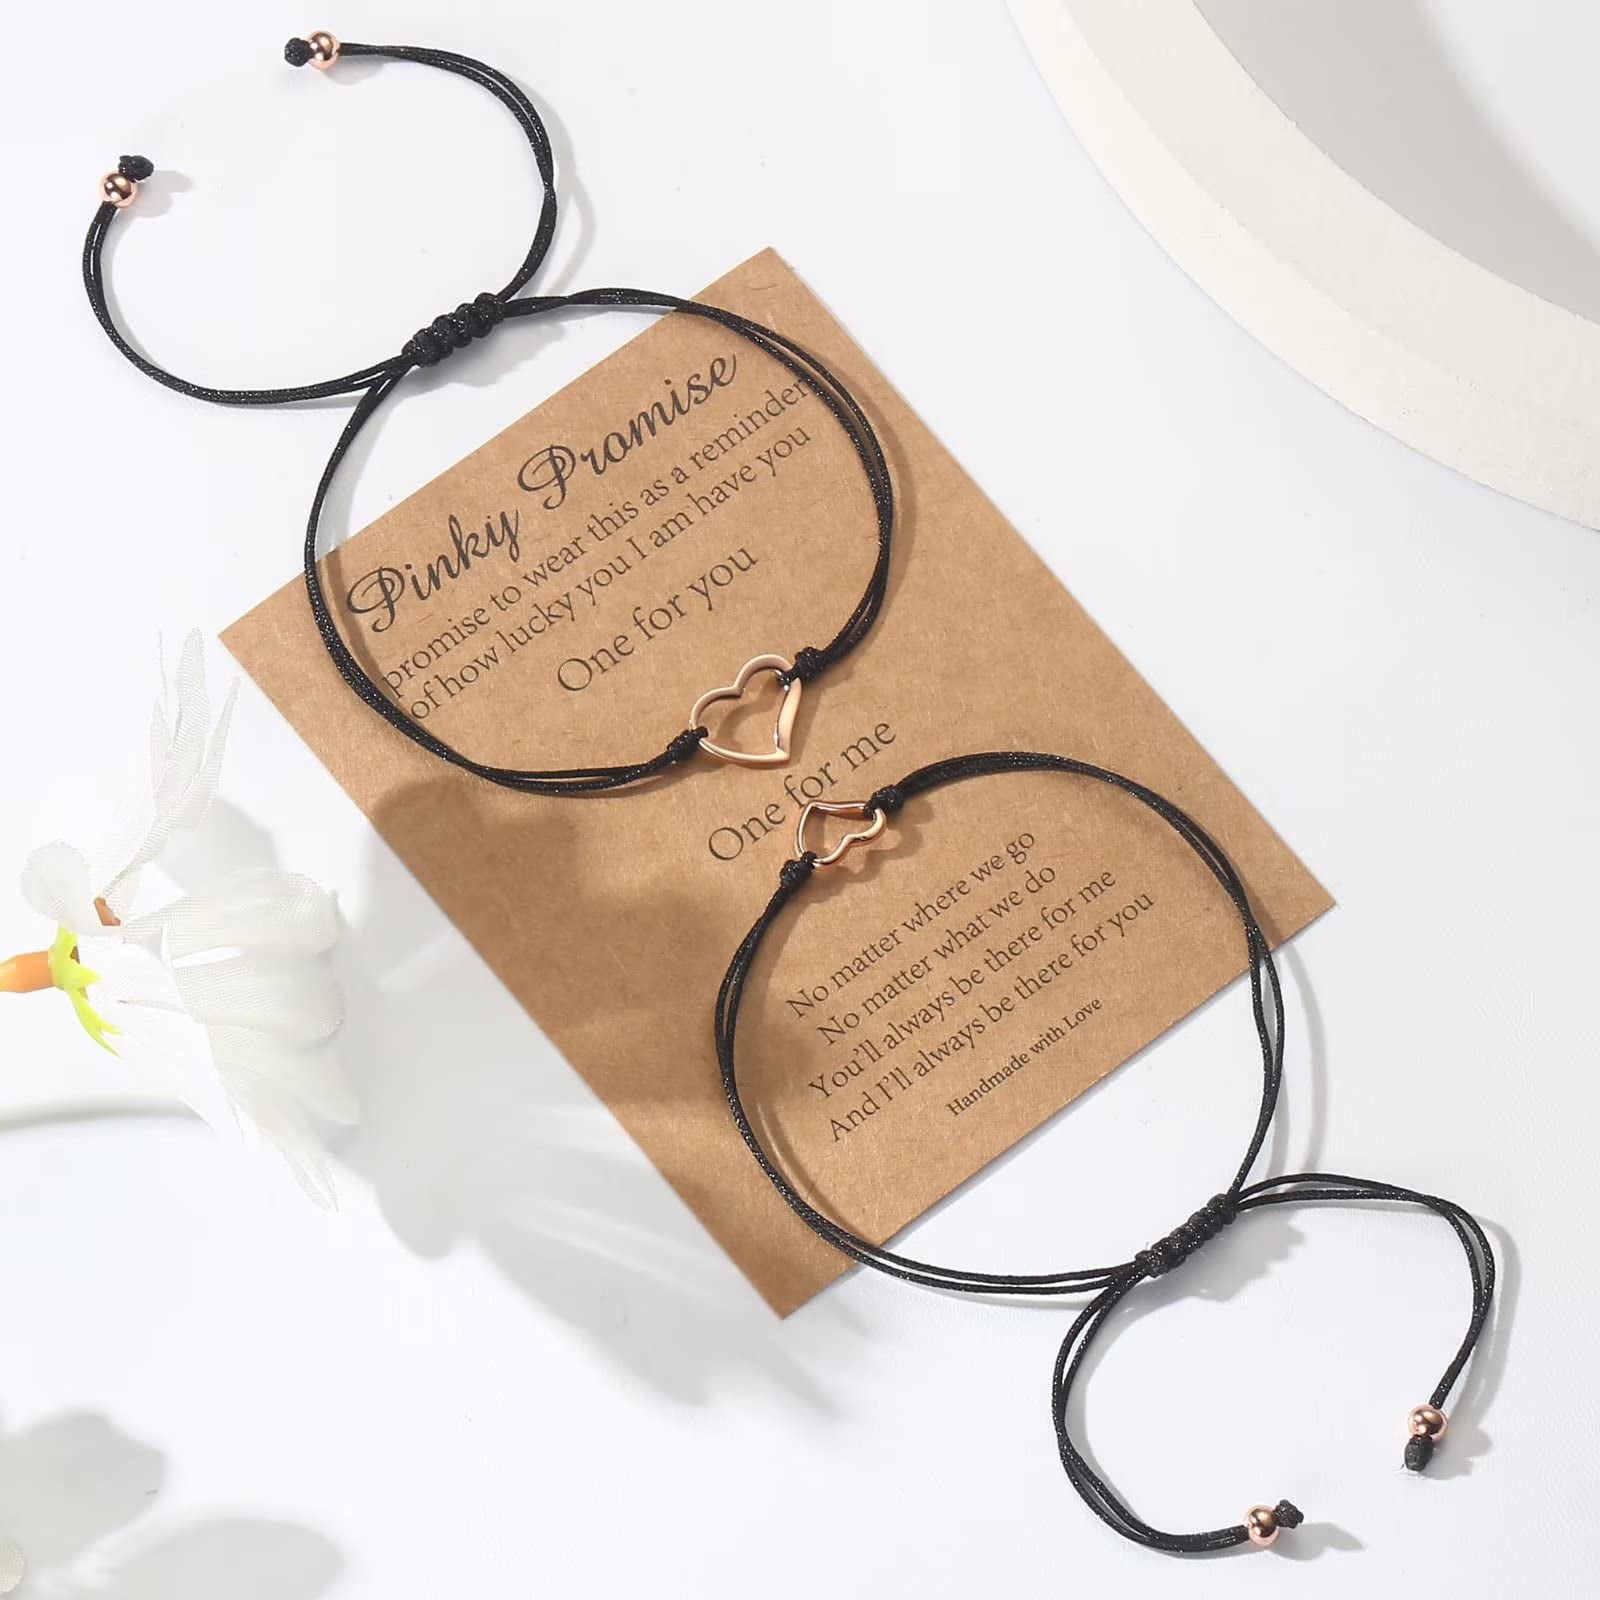 Volcanic Stone Promise Long Distance Relationship Bracelets For Couples  Perfect For Distance Matching, Ideal For Best Friends, Family, Women, Men,  Teen Girls From Jiehan_jewelry, $1.93 | DHgate.Com